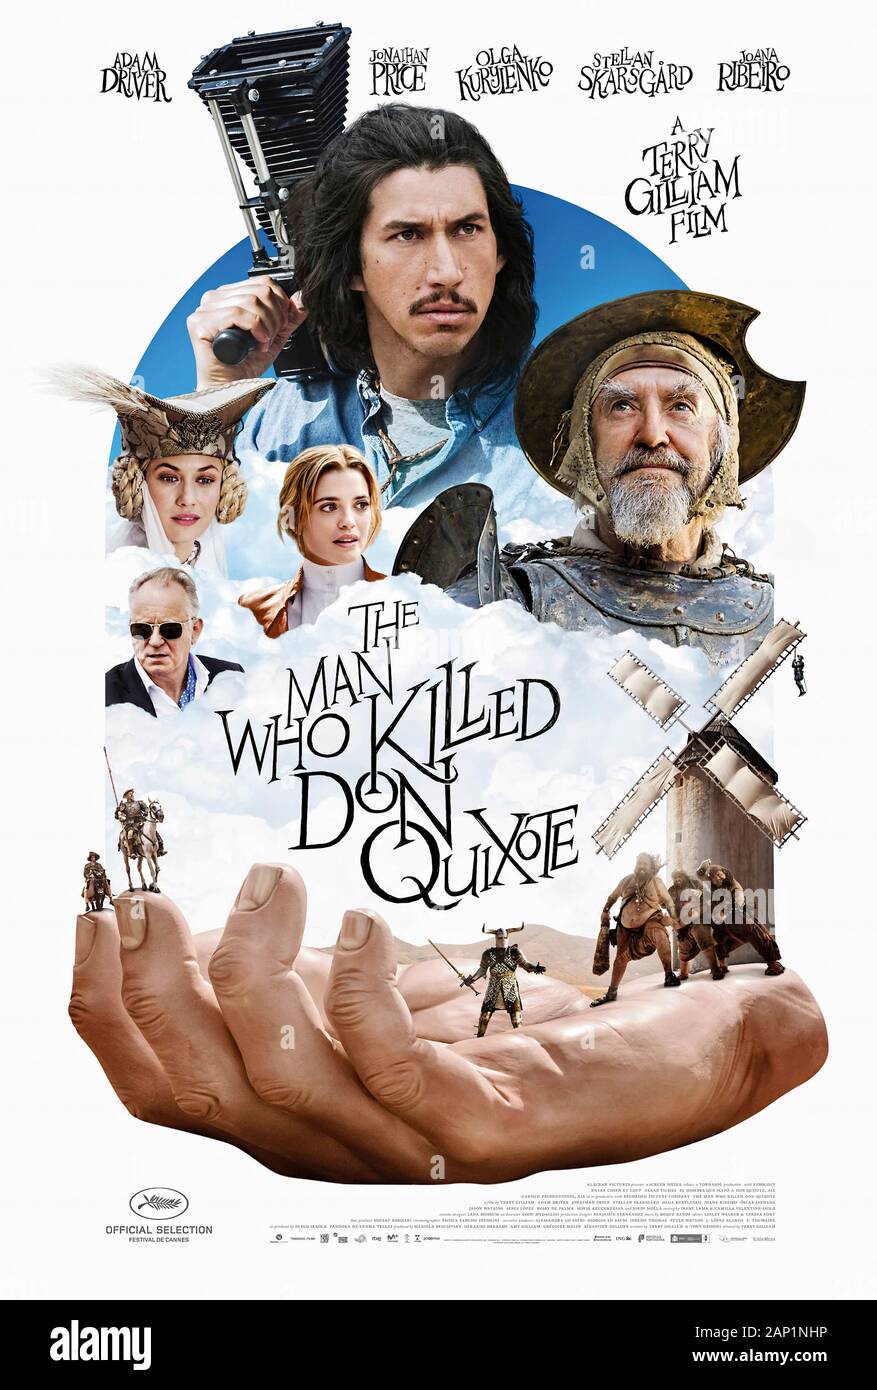 The Man Who Killed Don Quixote (2018) directed by Terry Gilliam and starring José Luis Ferrer, Ismael Fritschi, Juan López-Tagle, Jonathan Pryce and Adam Driver. Comedy about a film director trapped in the delusions of a Spanish cobbler who thinks he is the legendary Don Quixote. Stock Photo